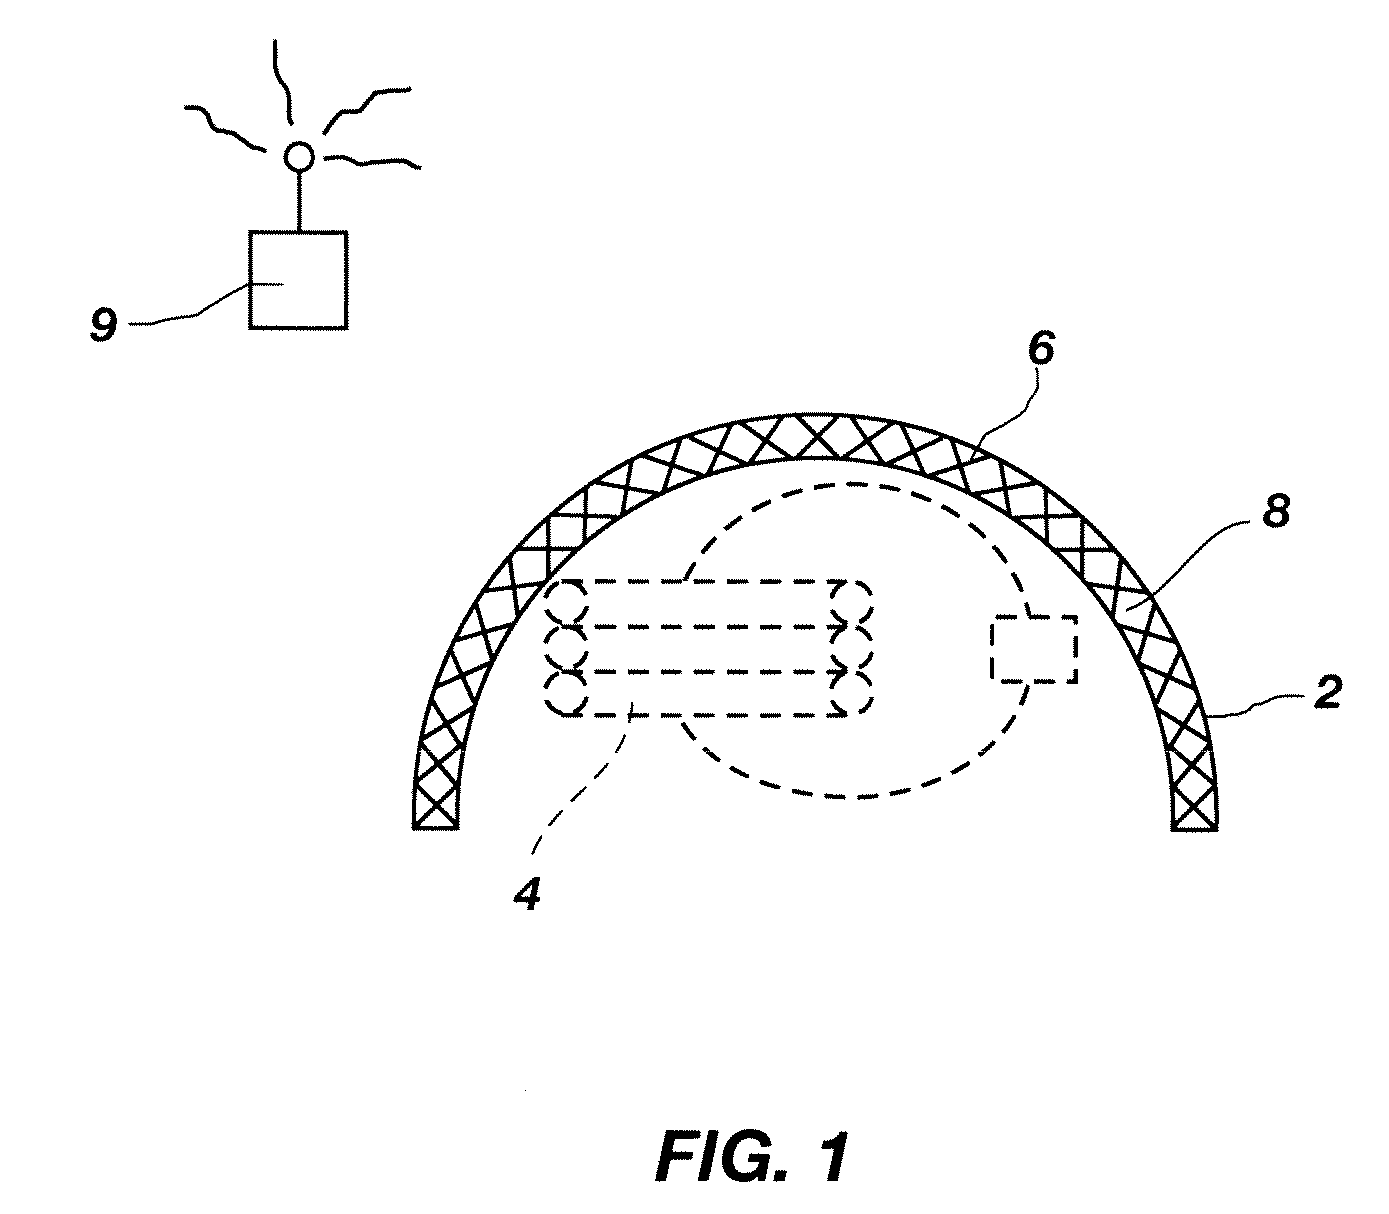 Methods of preventing initiation of explosive devices, deactivated explosive devices, and a method of disrupting communication between a detonation device and an explosive device